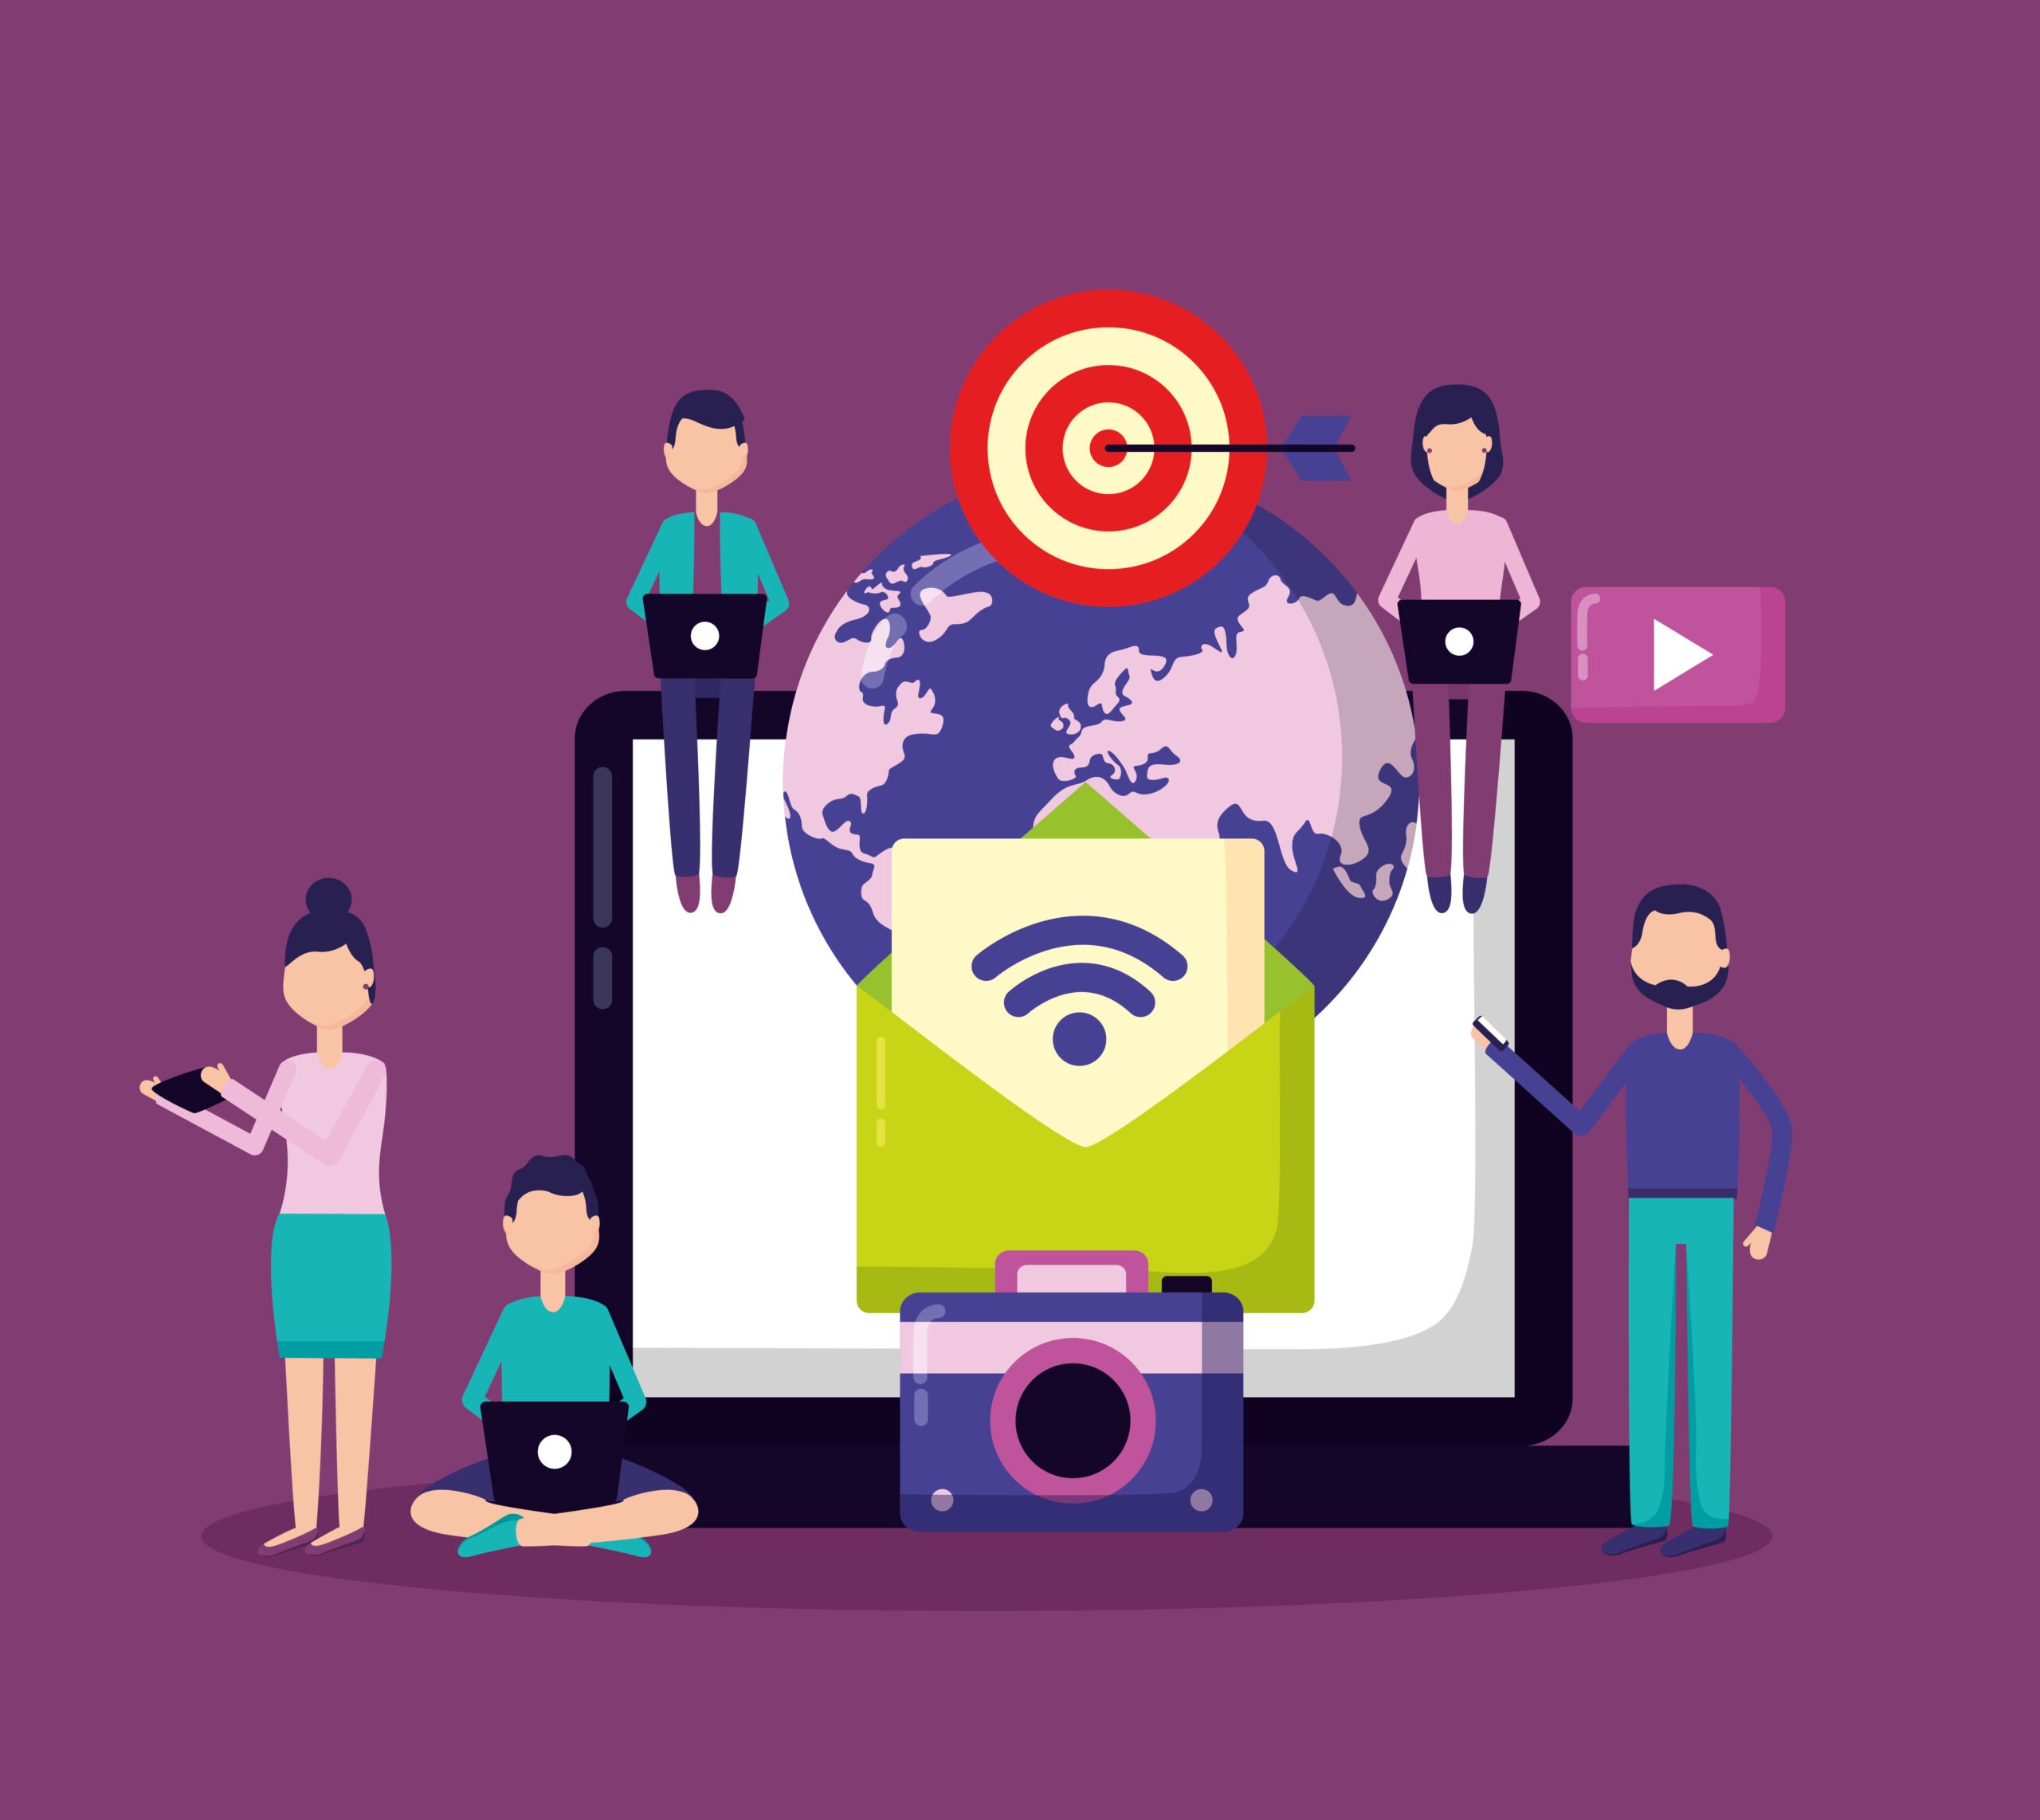 a graphic vector of several people surround a laptop, camera, and a wifi link. On top of all that is a bullseye target with an arrow in the middle.